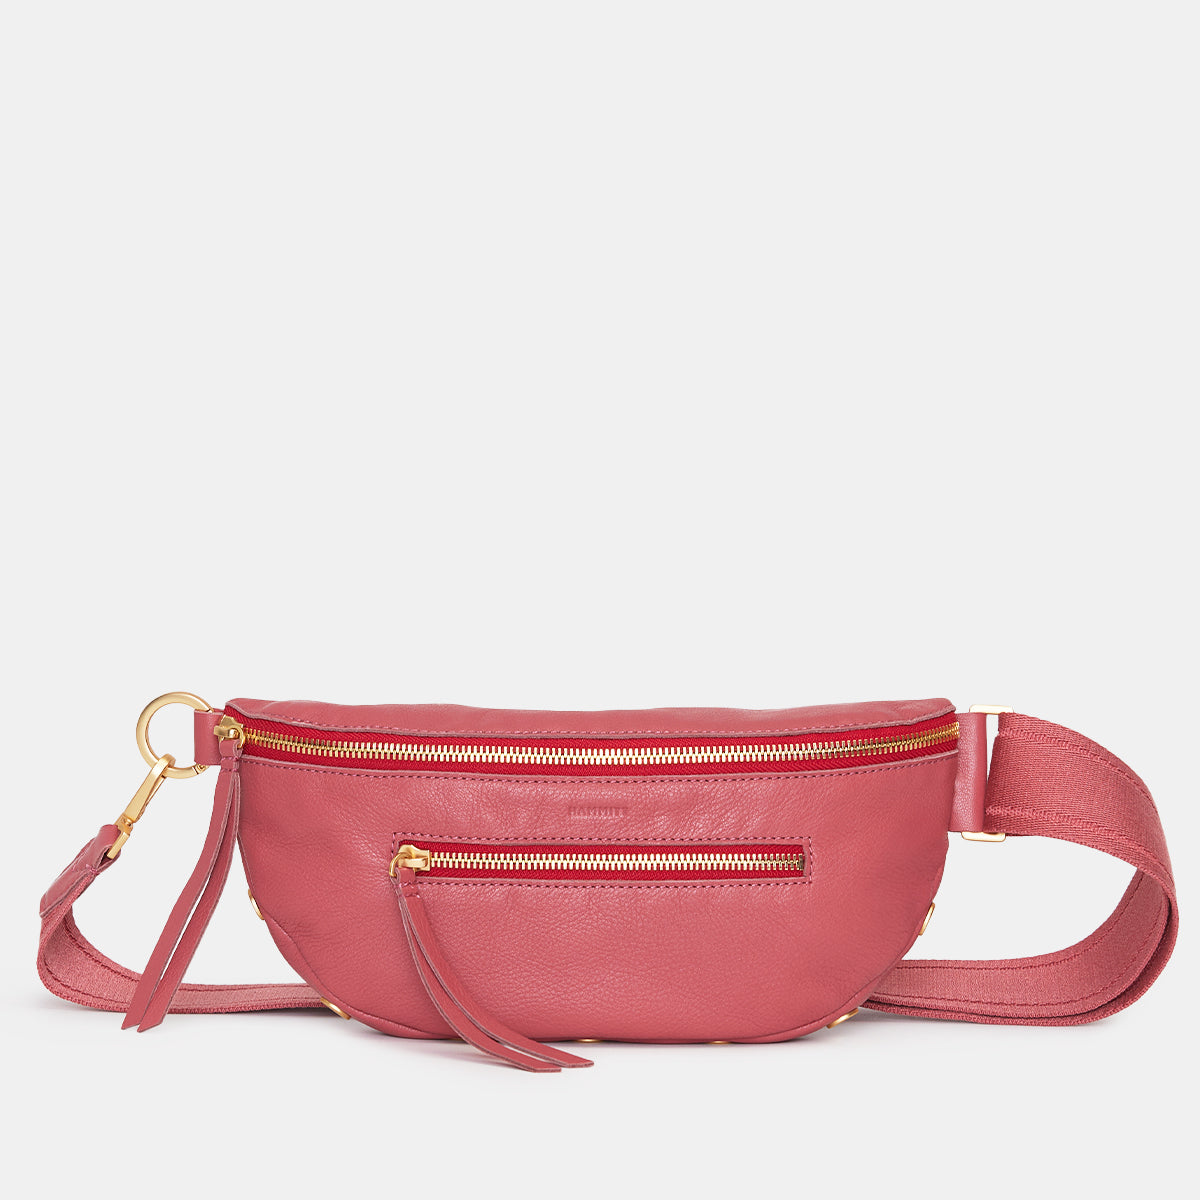 Charles-Crossbody-Rouge-Pink-Front-View